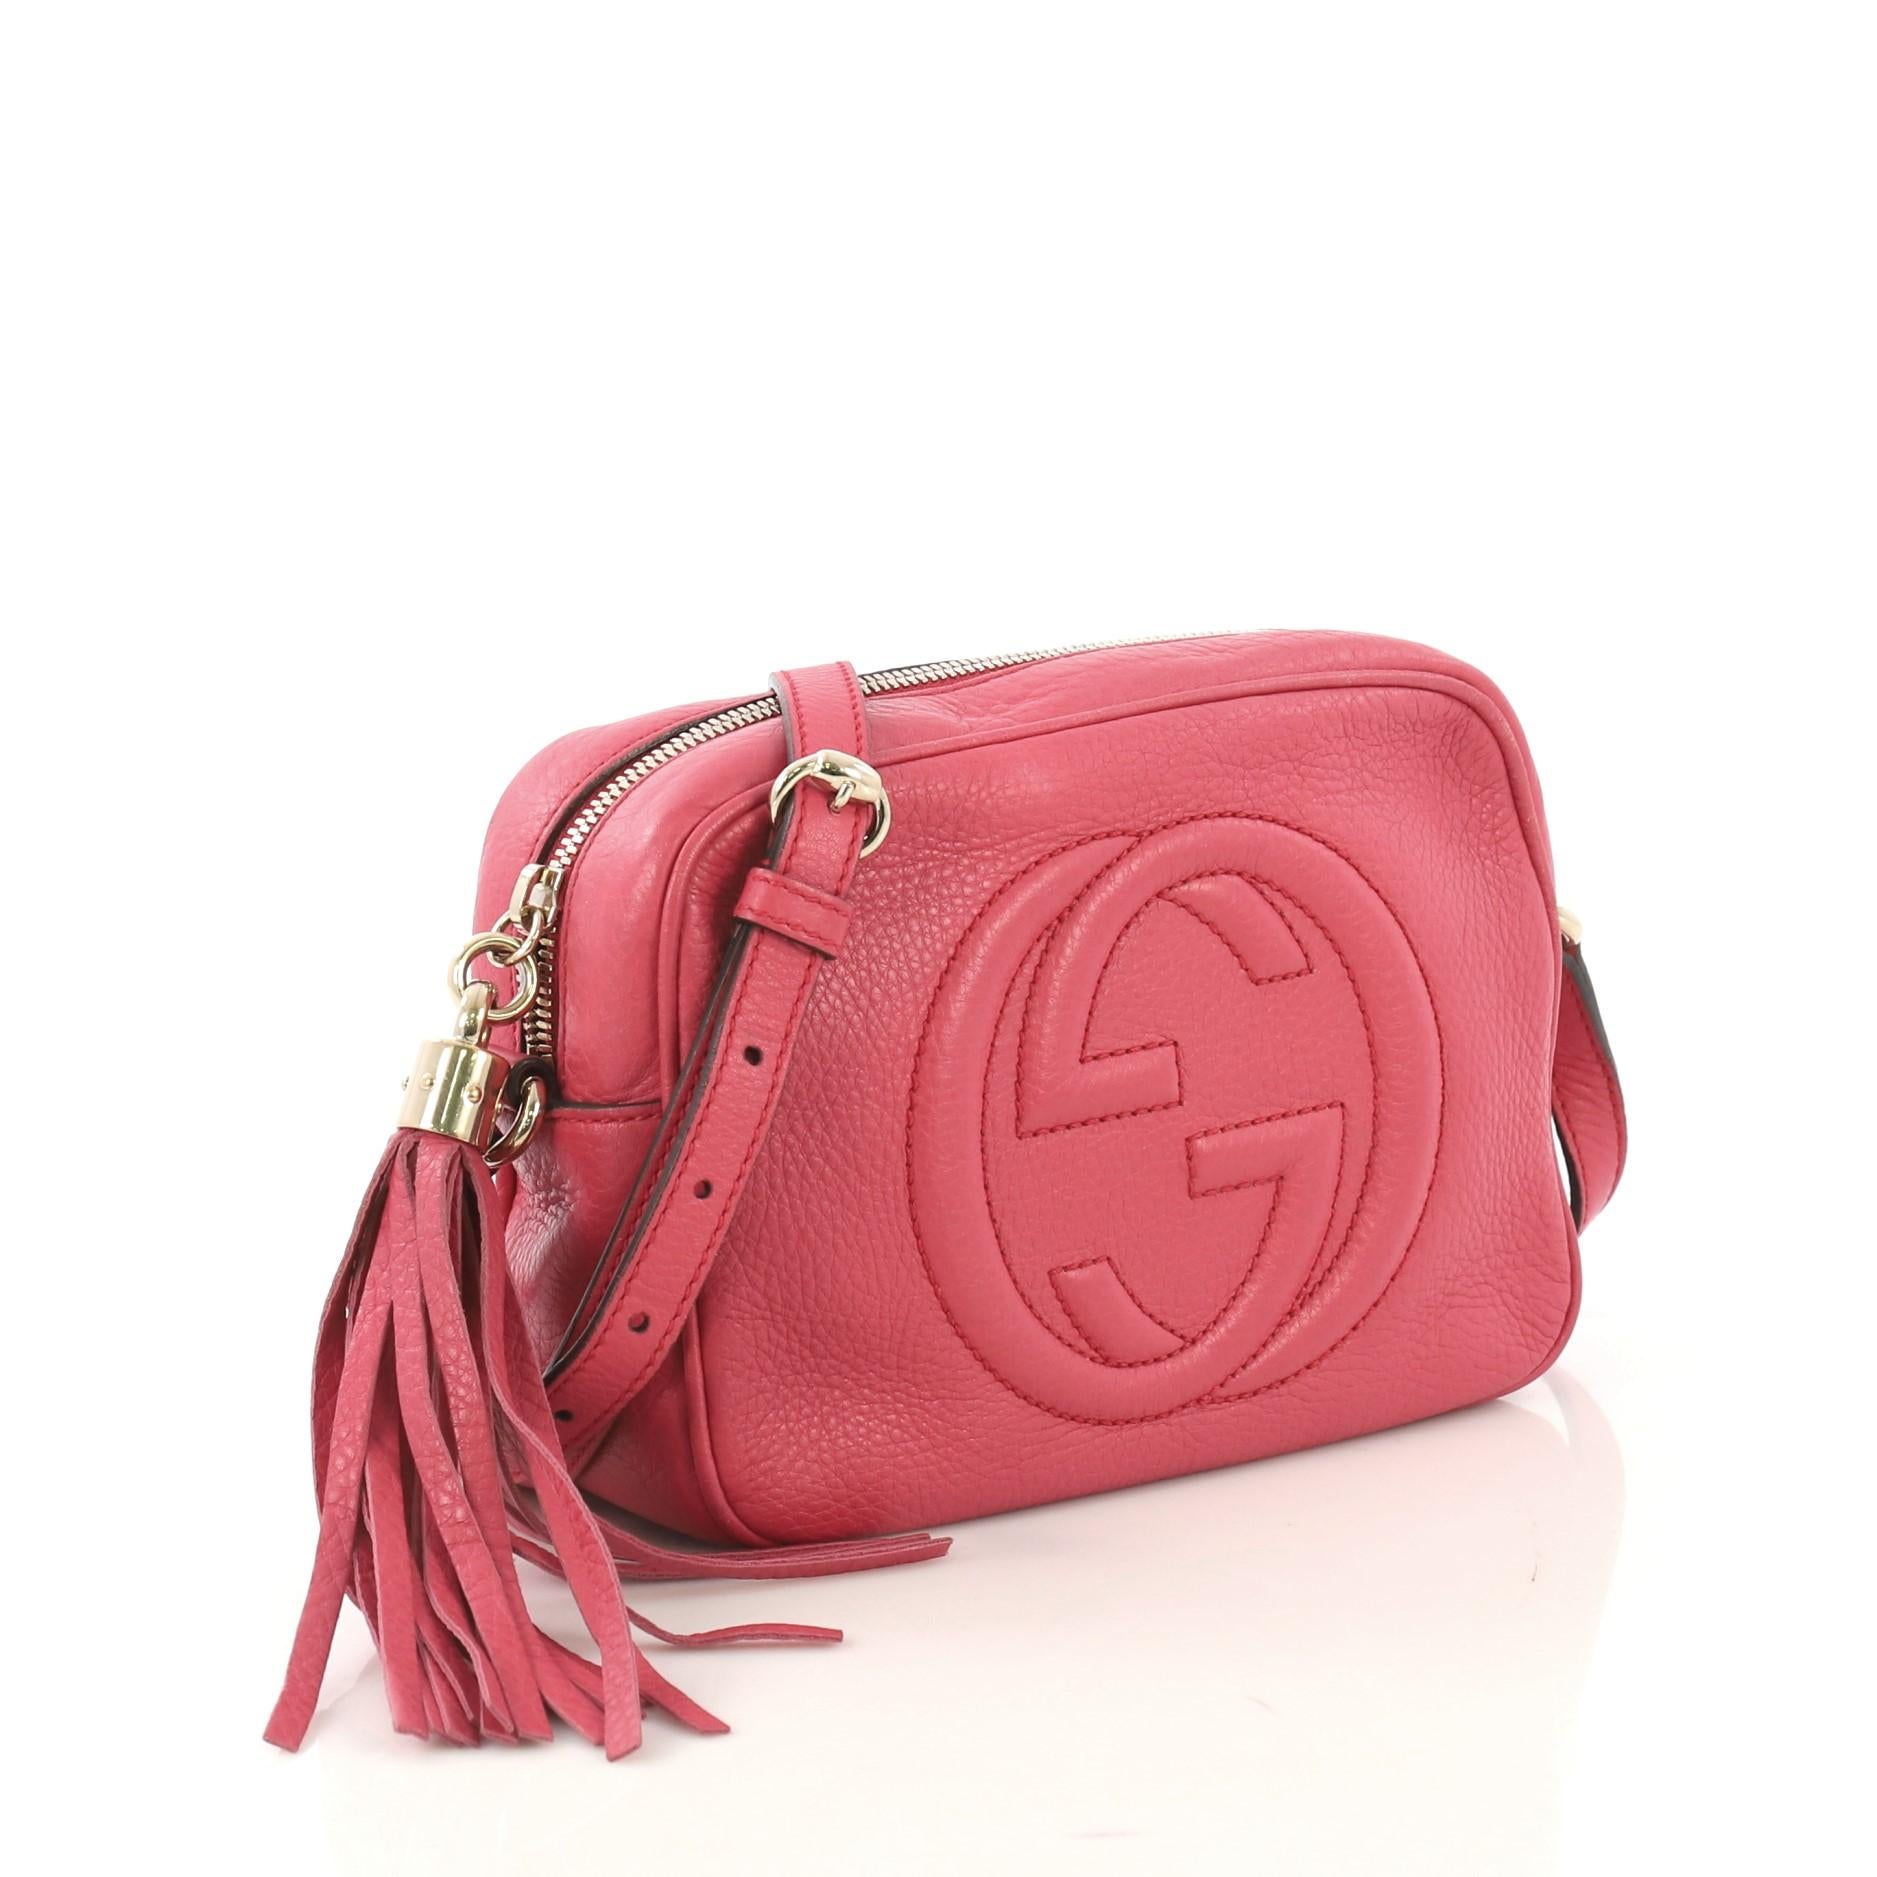 This Gucci Soho Disco Crossbody Bag Leather Small, crafted in pink leather, features an adjustable leather strap, tassel zip pull, and gold-tone hardware. Its zip closure opens to a beige fabric interior with slip pockets. 

Estimated Retail Price: